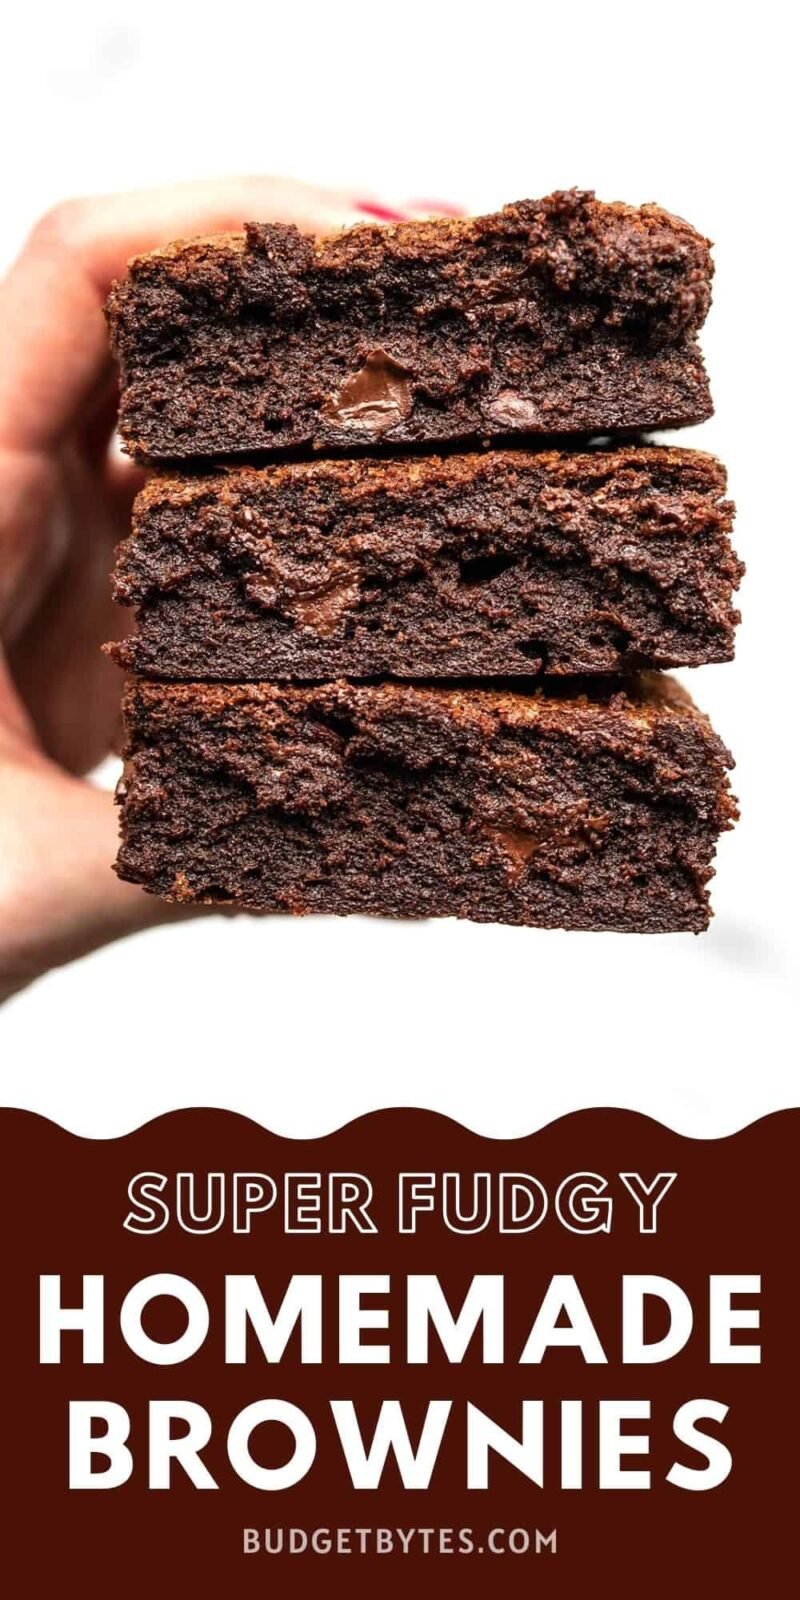 A hand holding a stack of three homemade brownies.